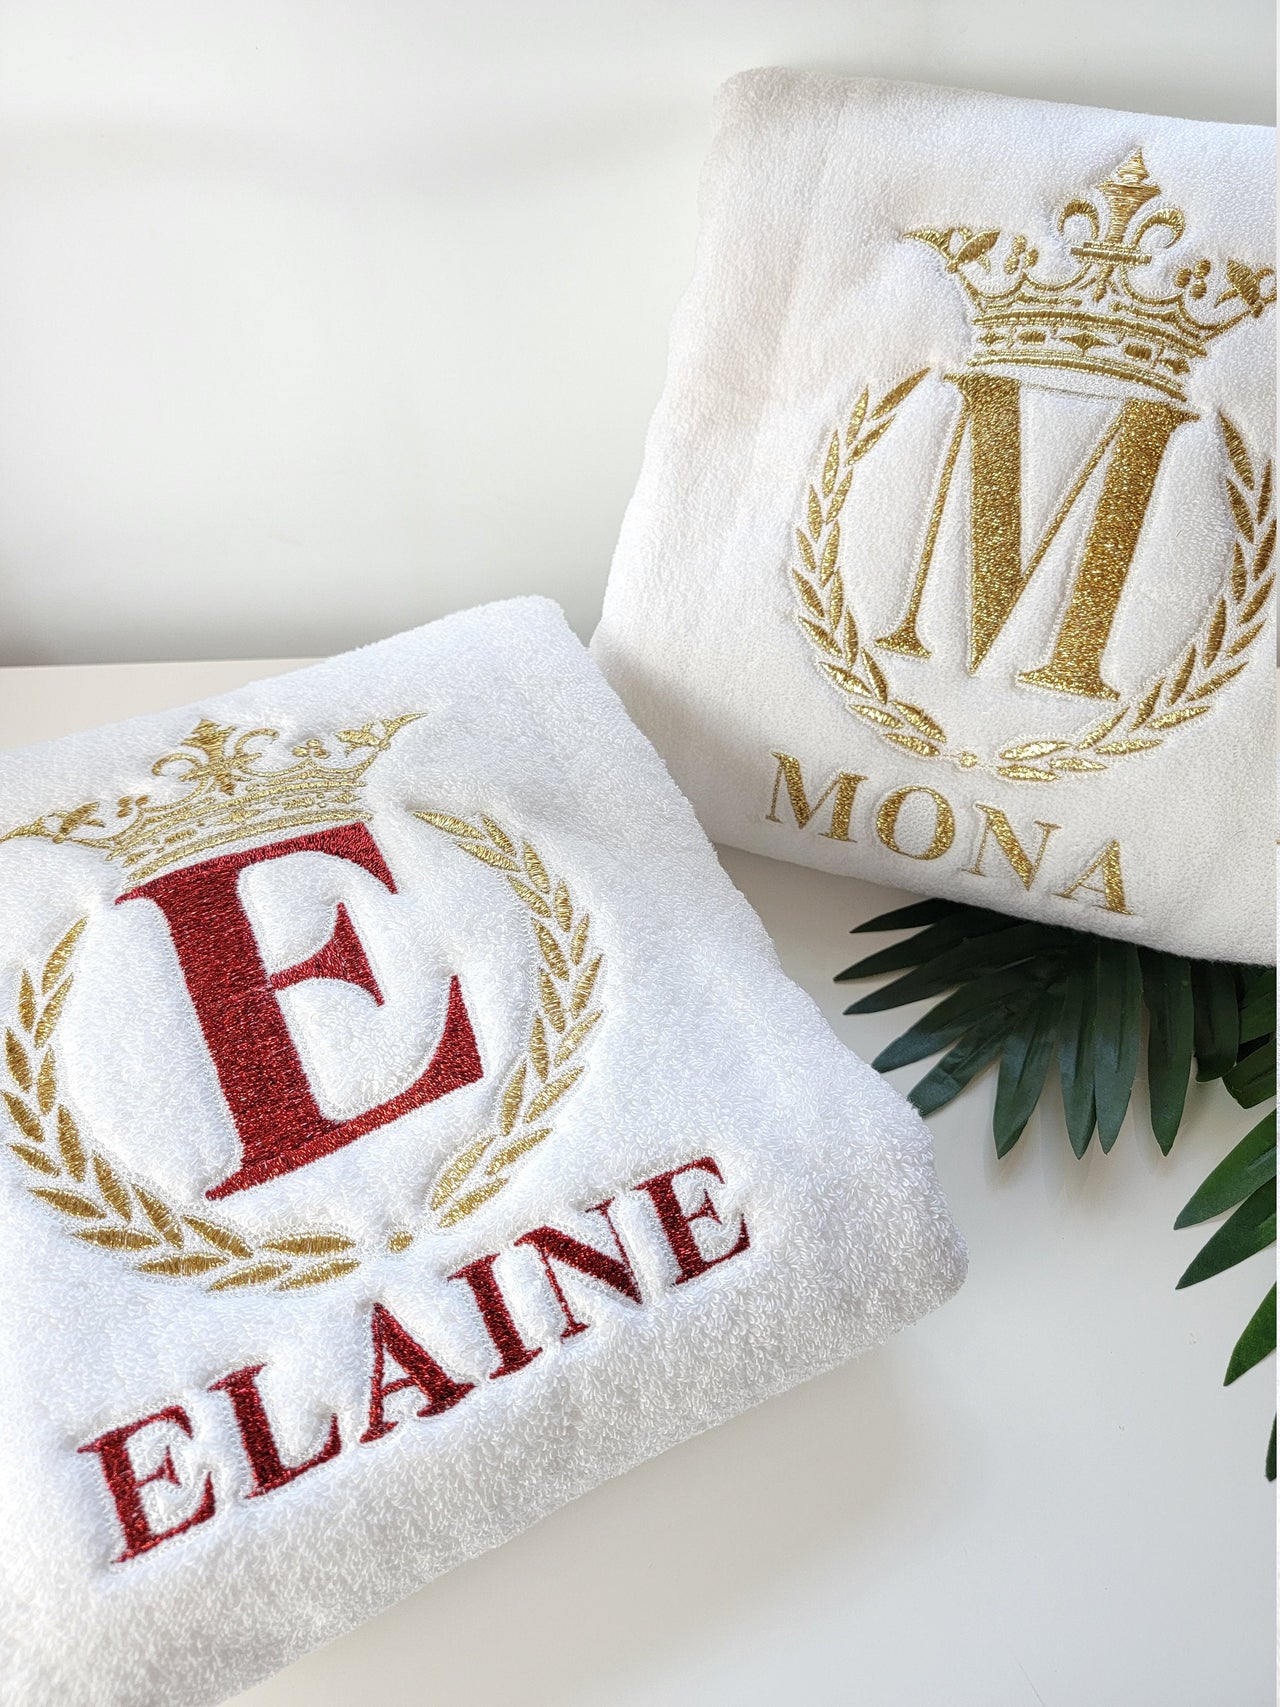 Personalized Bath Towel - Embroidered Monogrammed Towel with Queen Crown - Custom Embroidered Gift for Women - Embroidered Towel - Gift Box